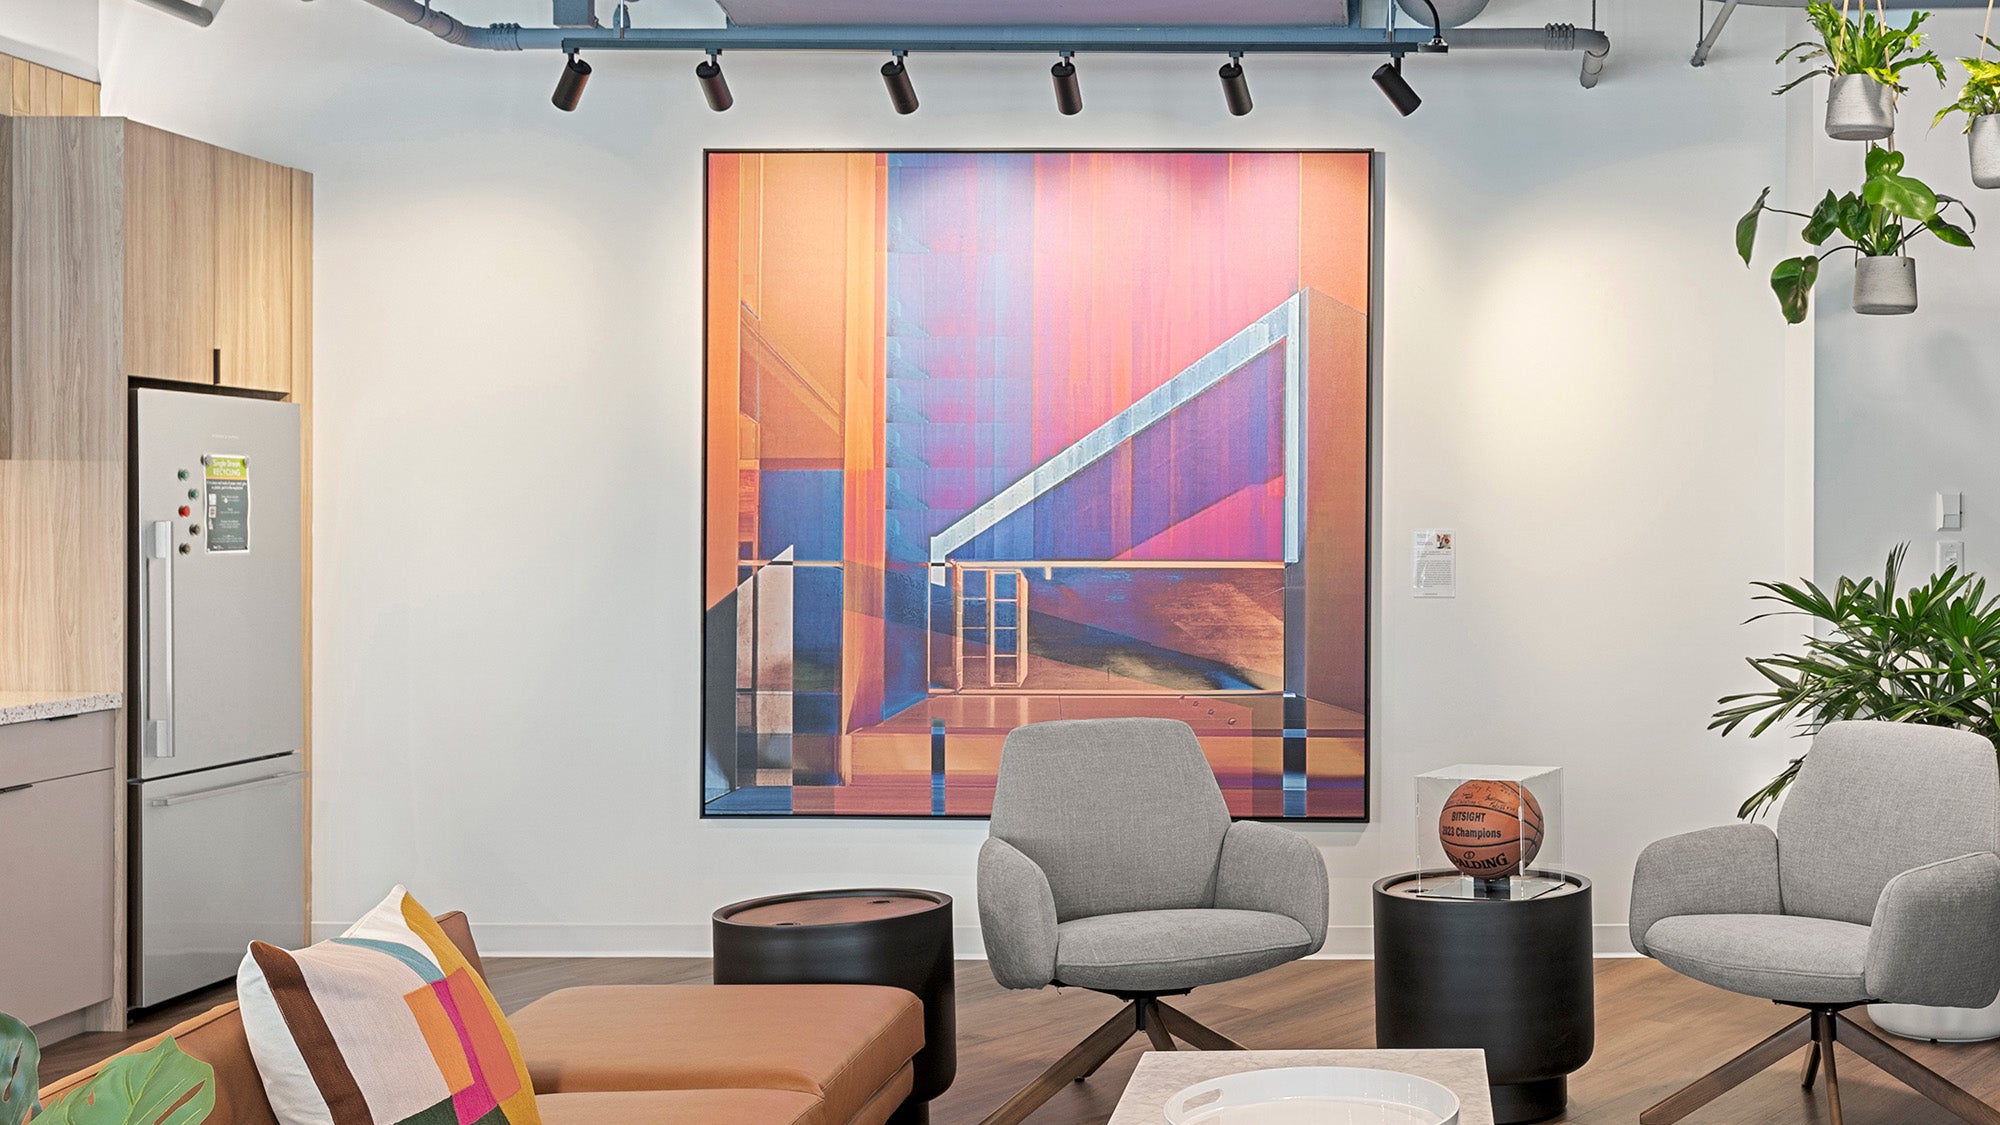 A huge artwork by Rick Ruark depicting a modern urban scene hangs on a white wall in an office common area with grey chairs, a leather couch, a stainless steel refridgerator, hanging plants, and a signed basketball displays on a side table.